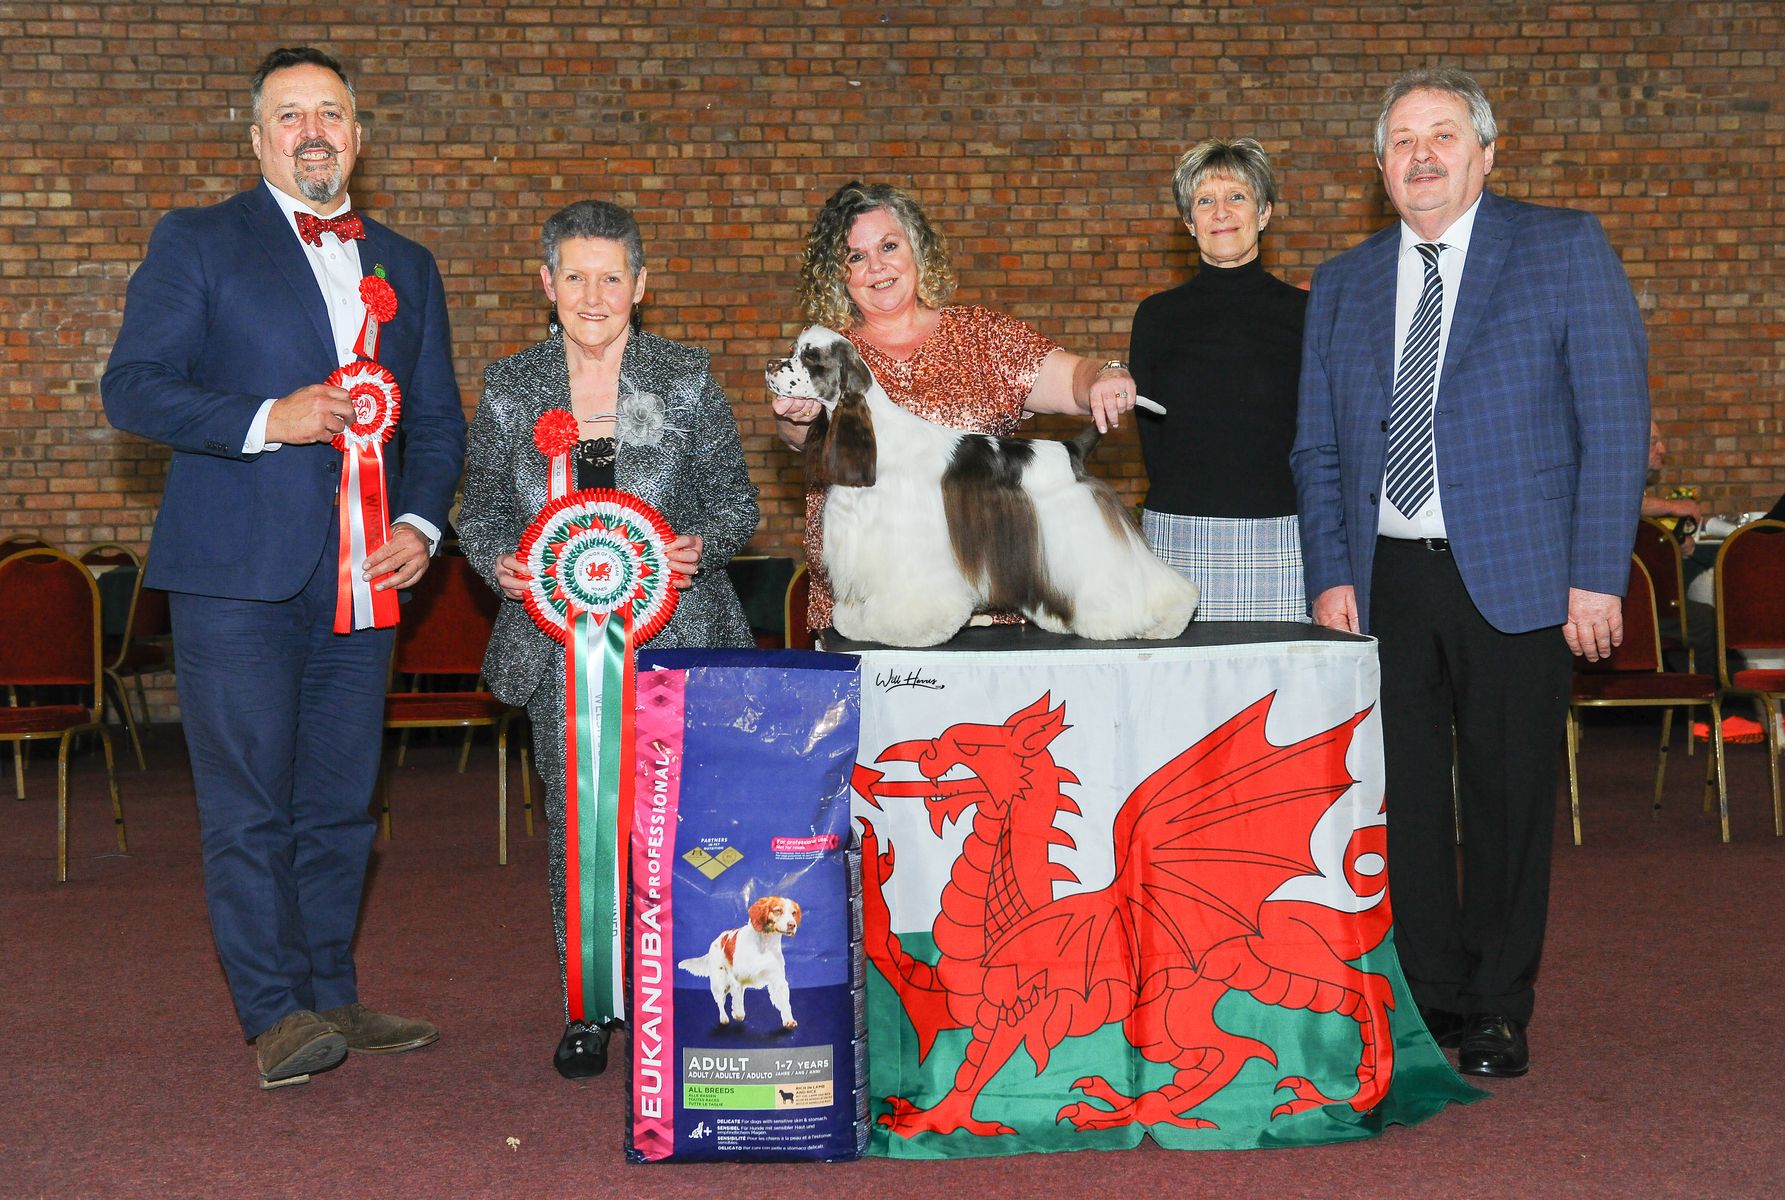 The Welsh Kennel Club